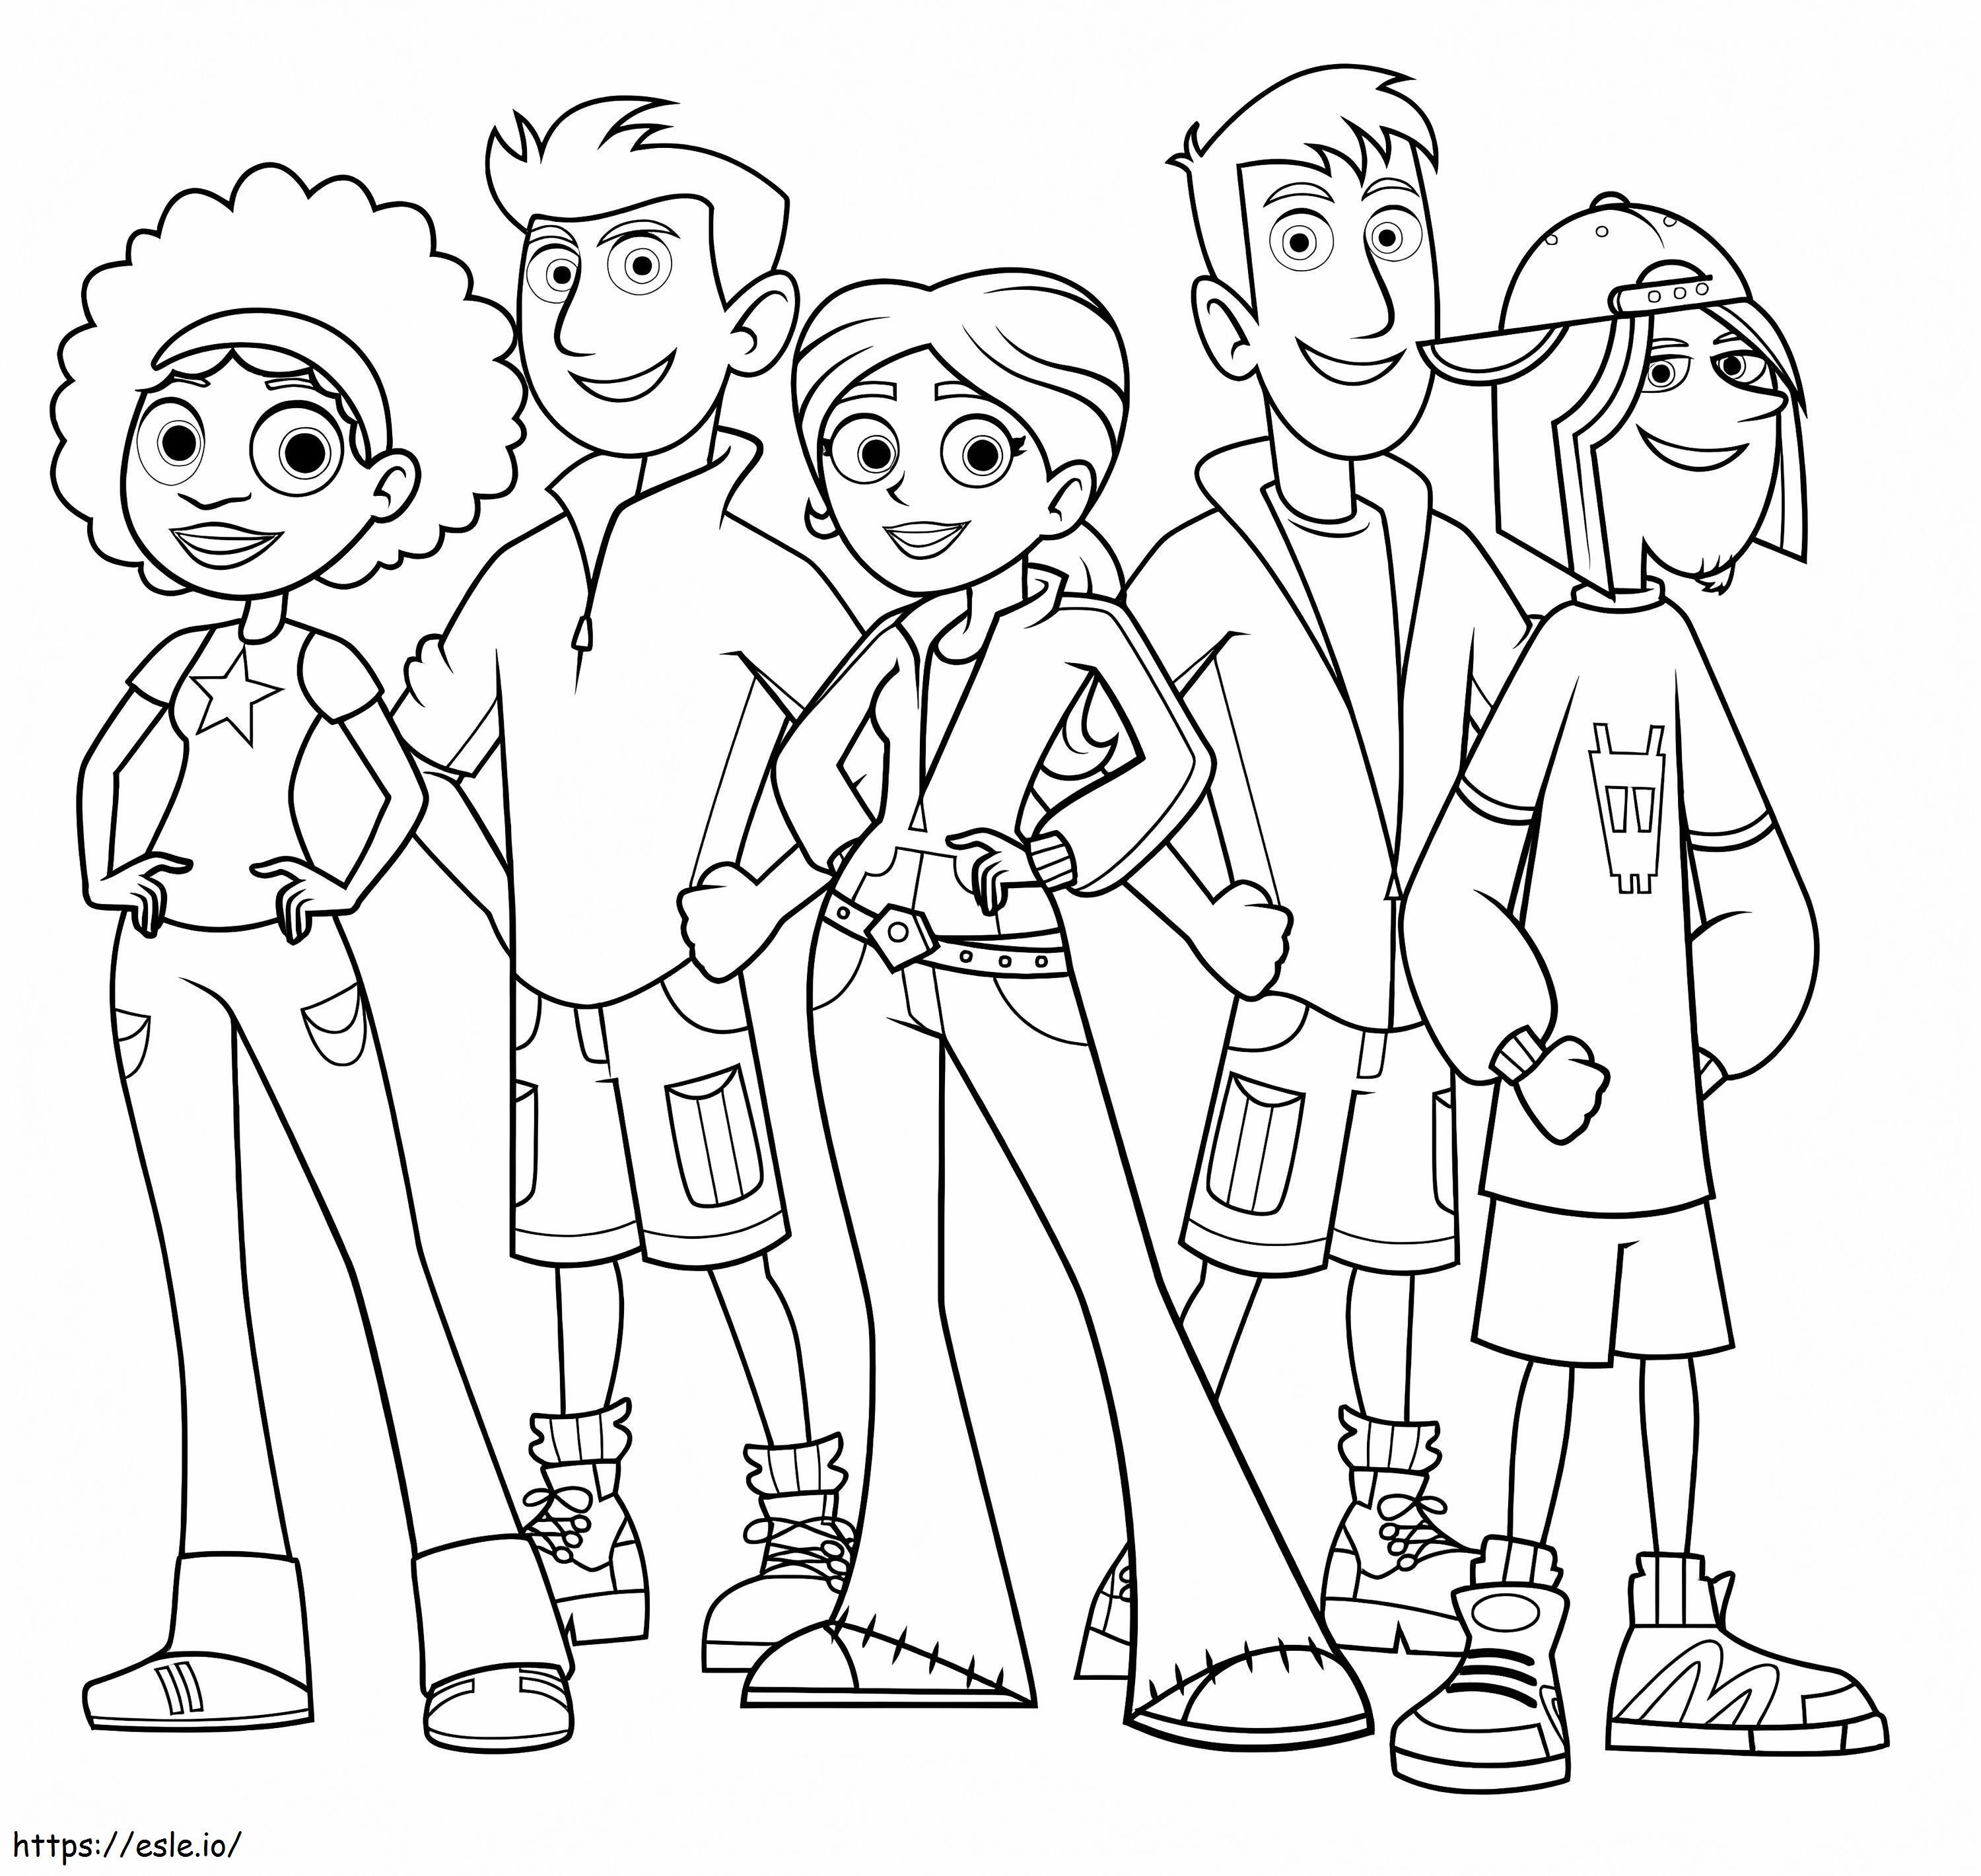 Characters From Wild Kratts coloring page